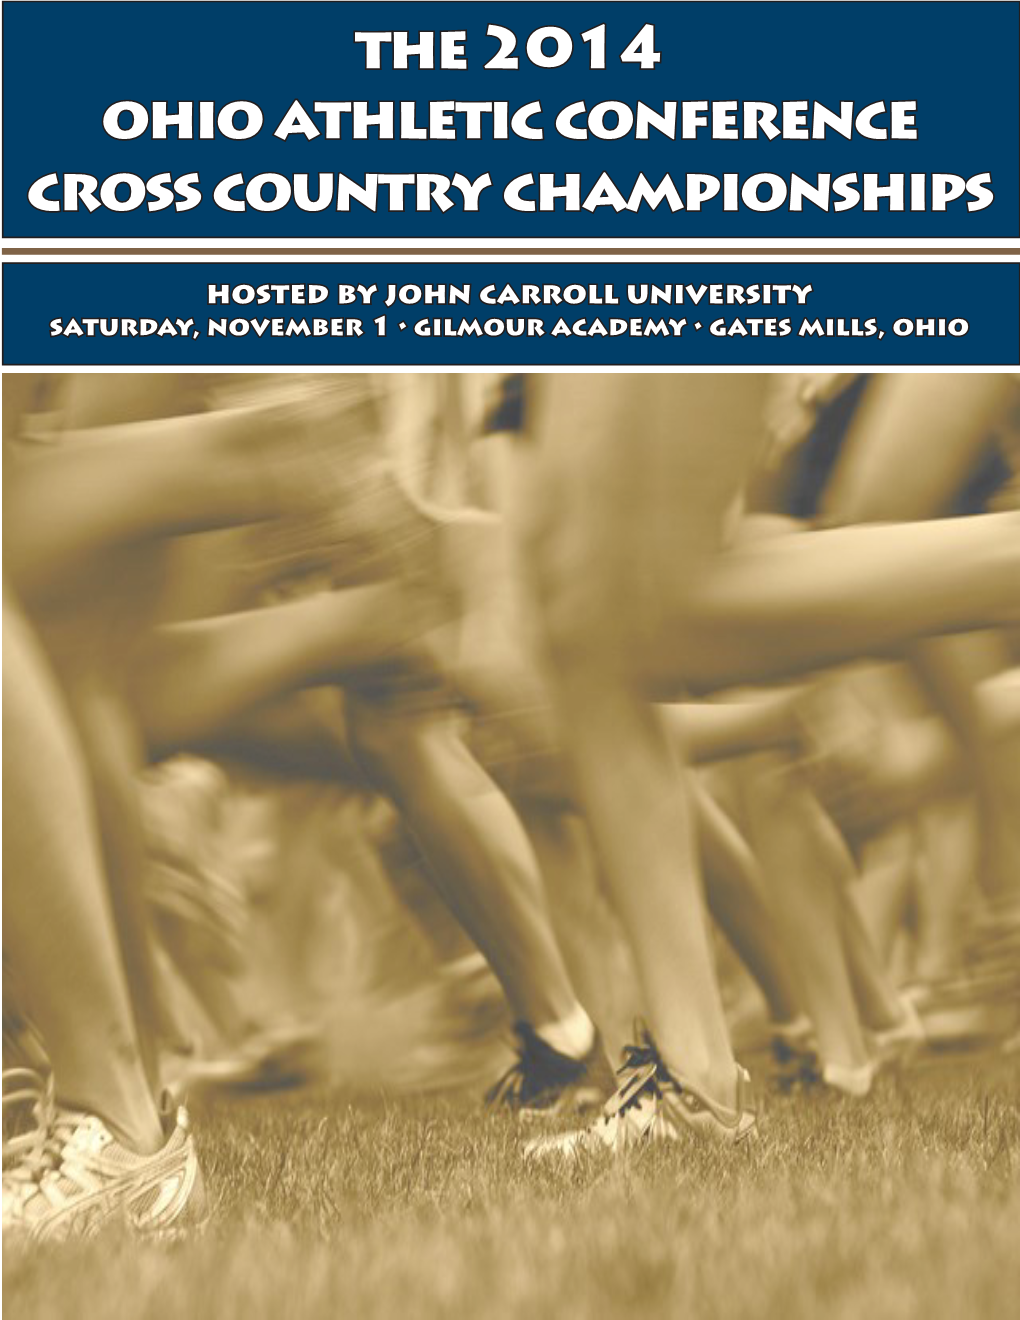 The 2014 Ohio Athletic Conference Cross Country Championships